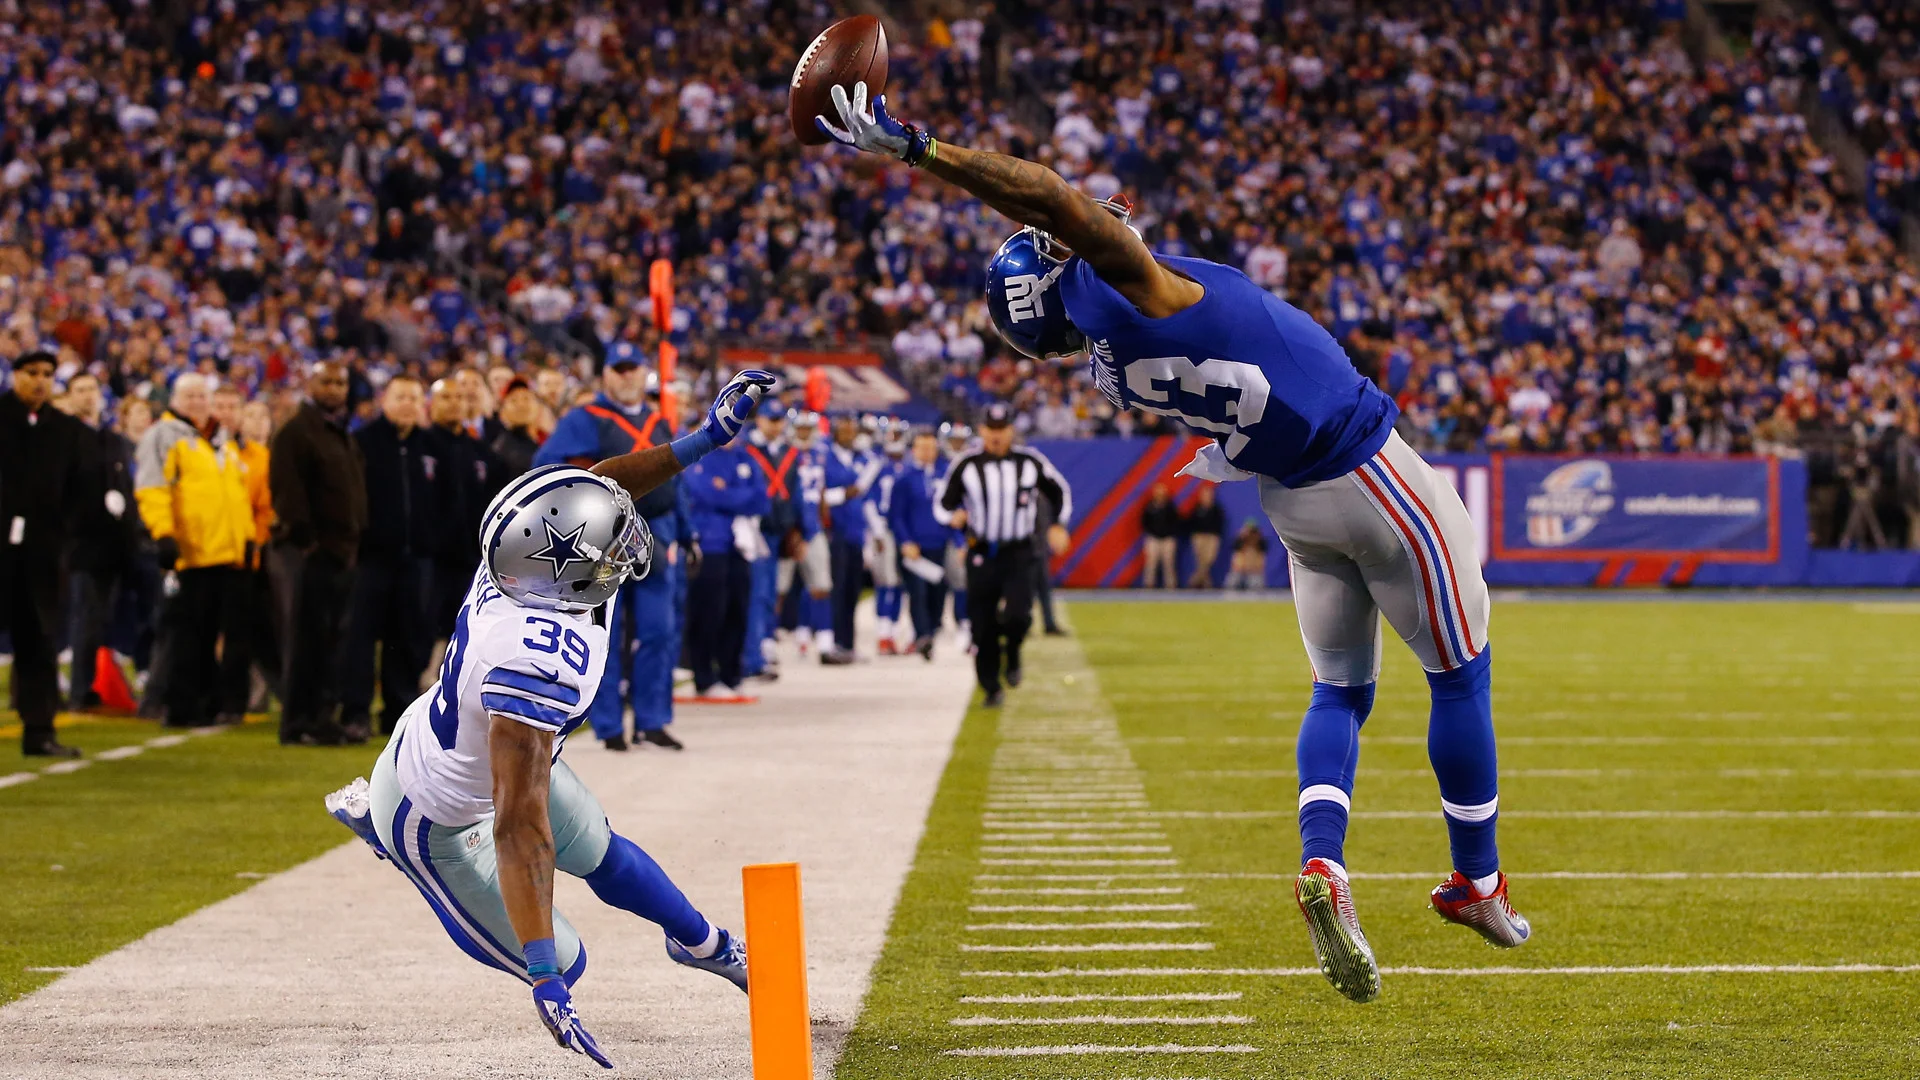 At a Sky Sports Facebook Live event, Odell Beckham Jr described the moment  that made